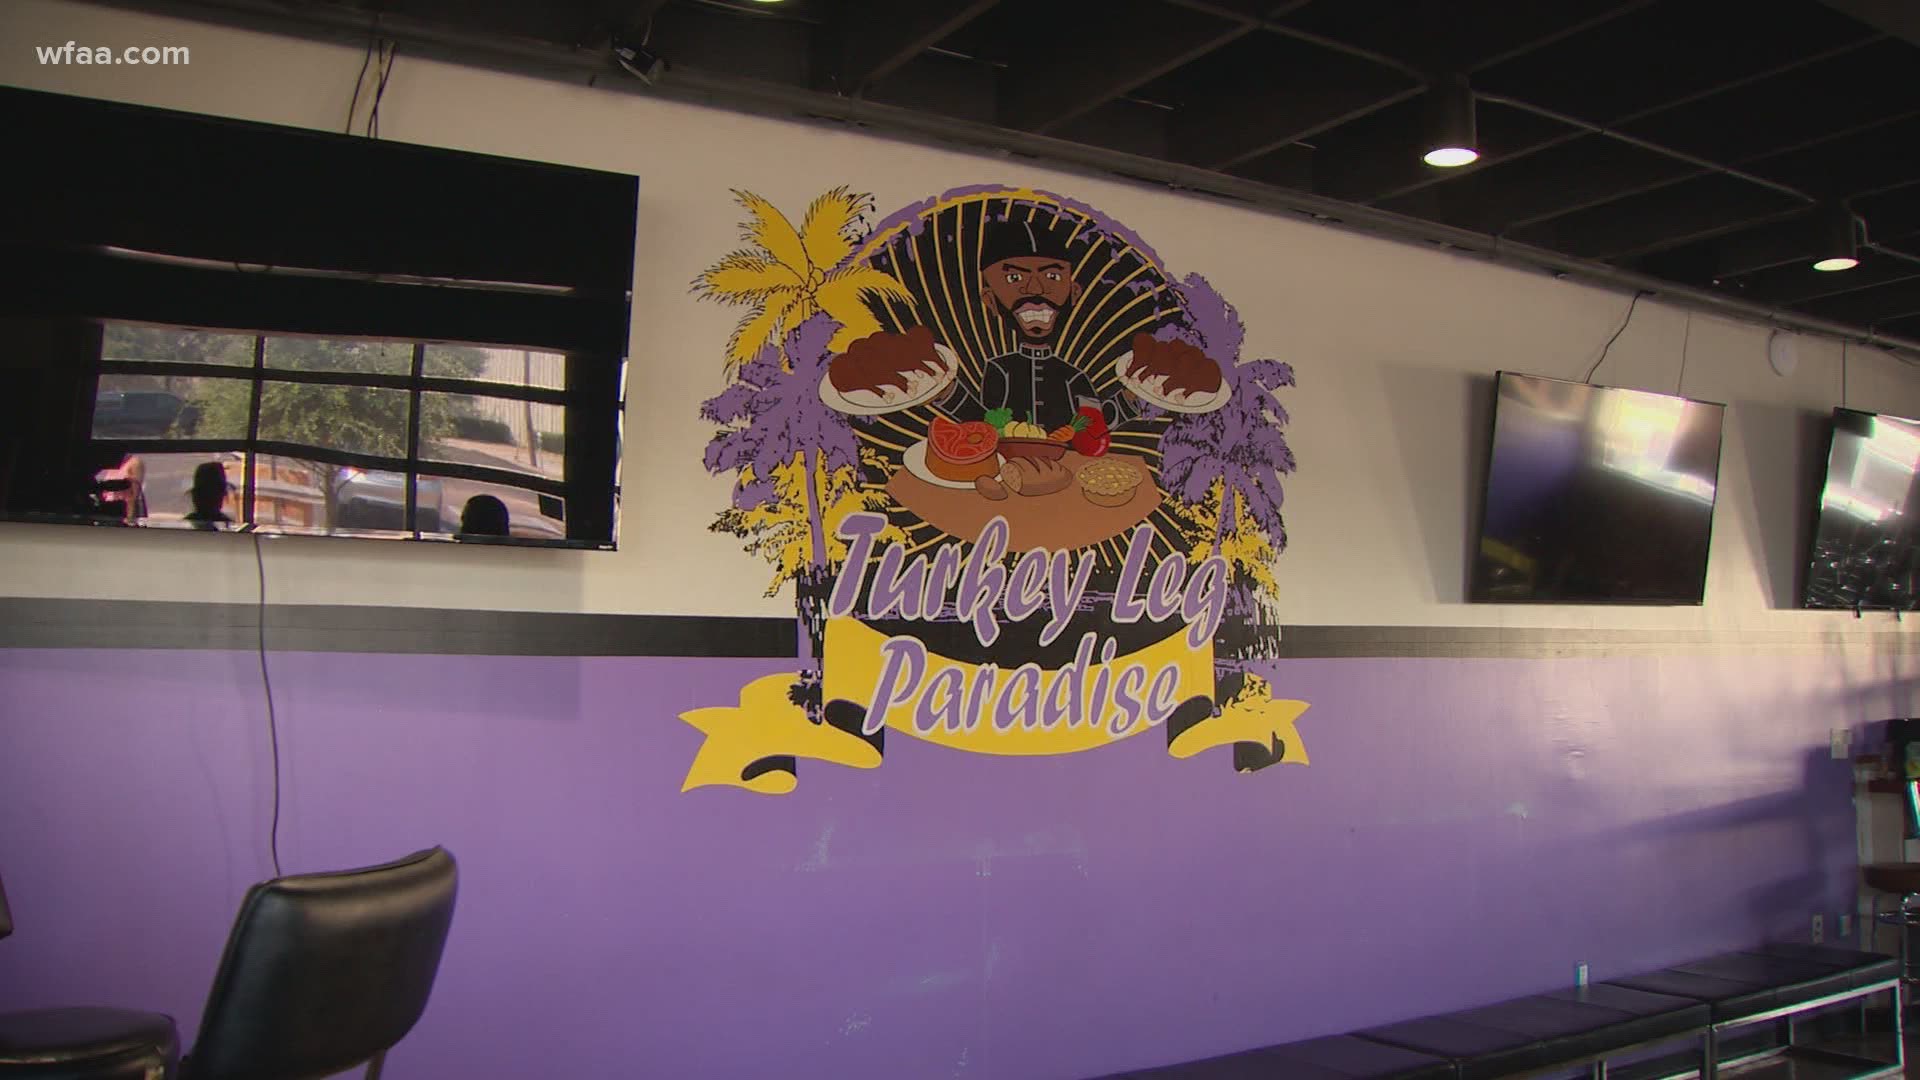 Turkey Leg Paradise plans to expand its menu, offering fair food favorites like corn dogs, sausage on a stick and funnel cakes.